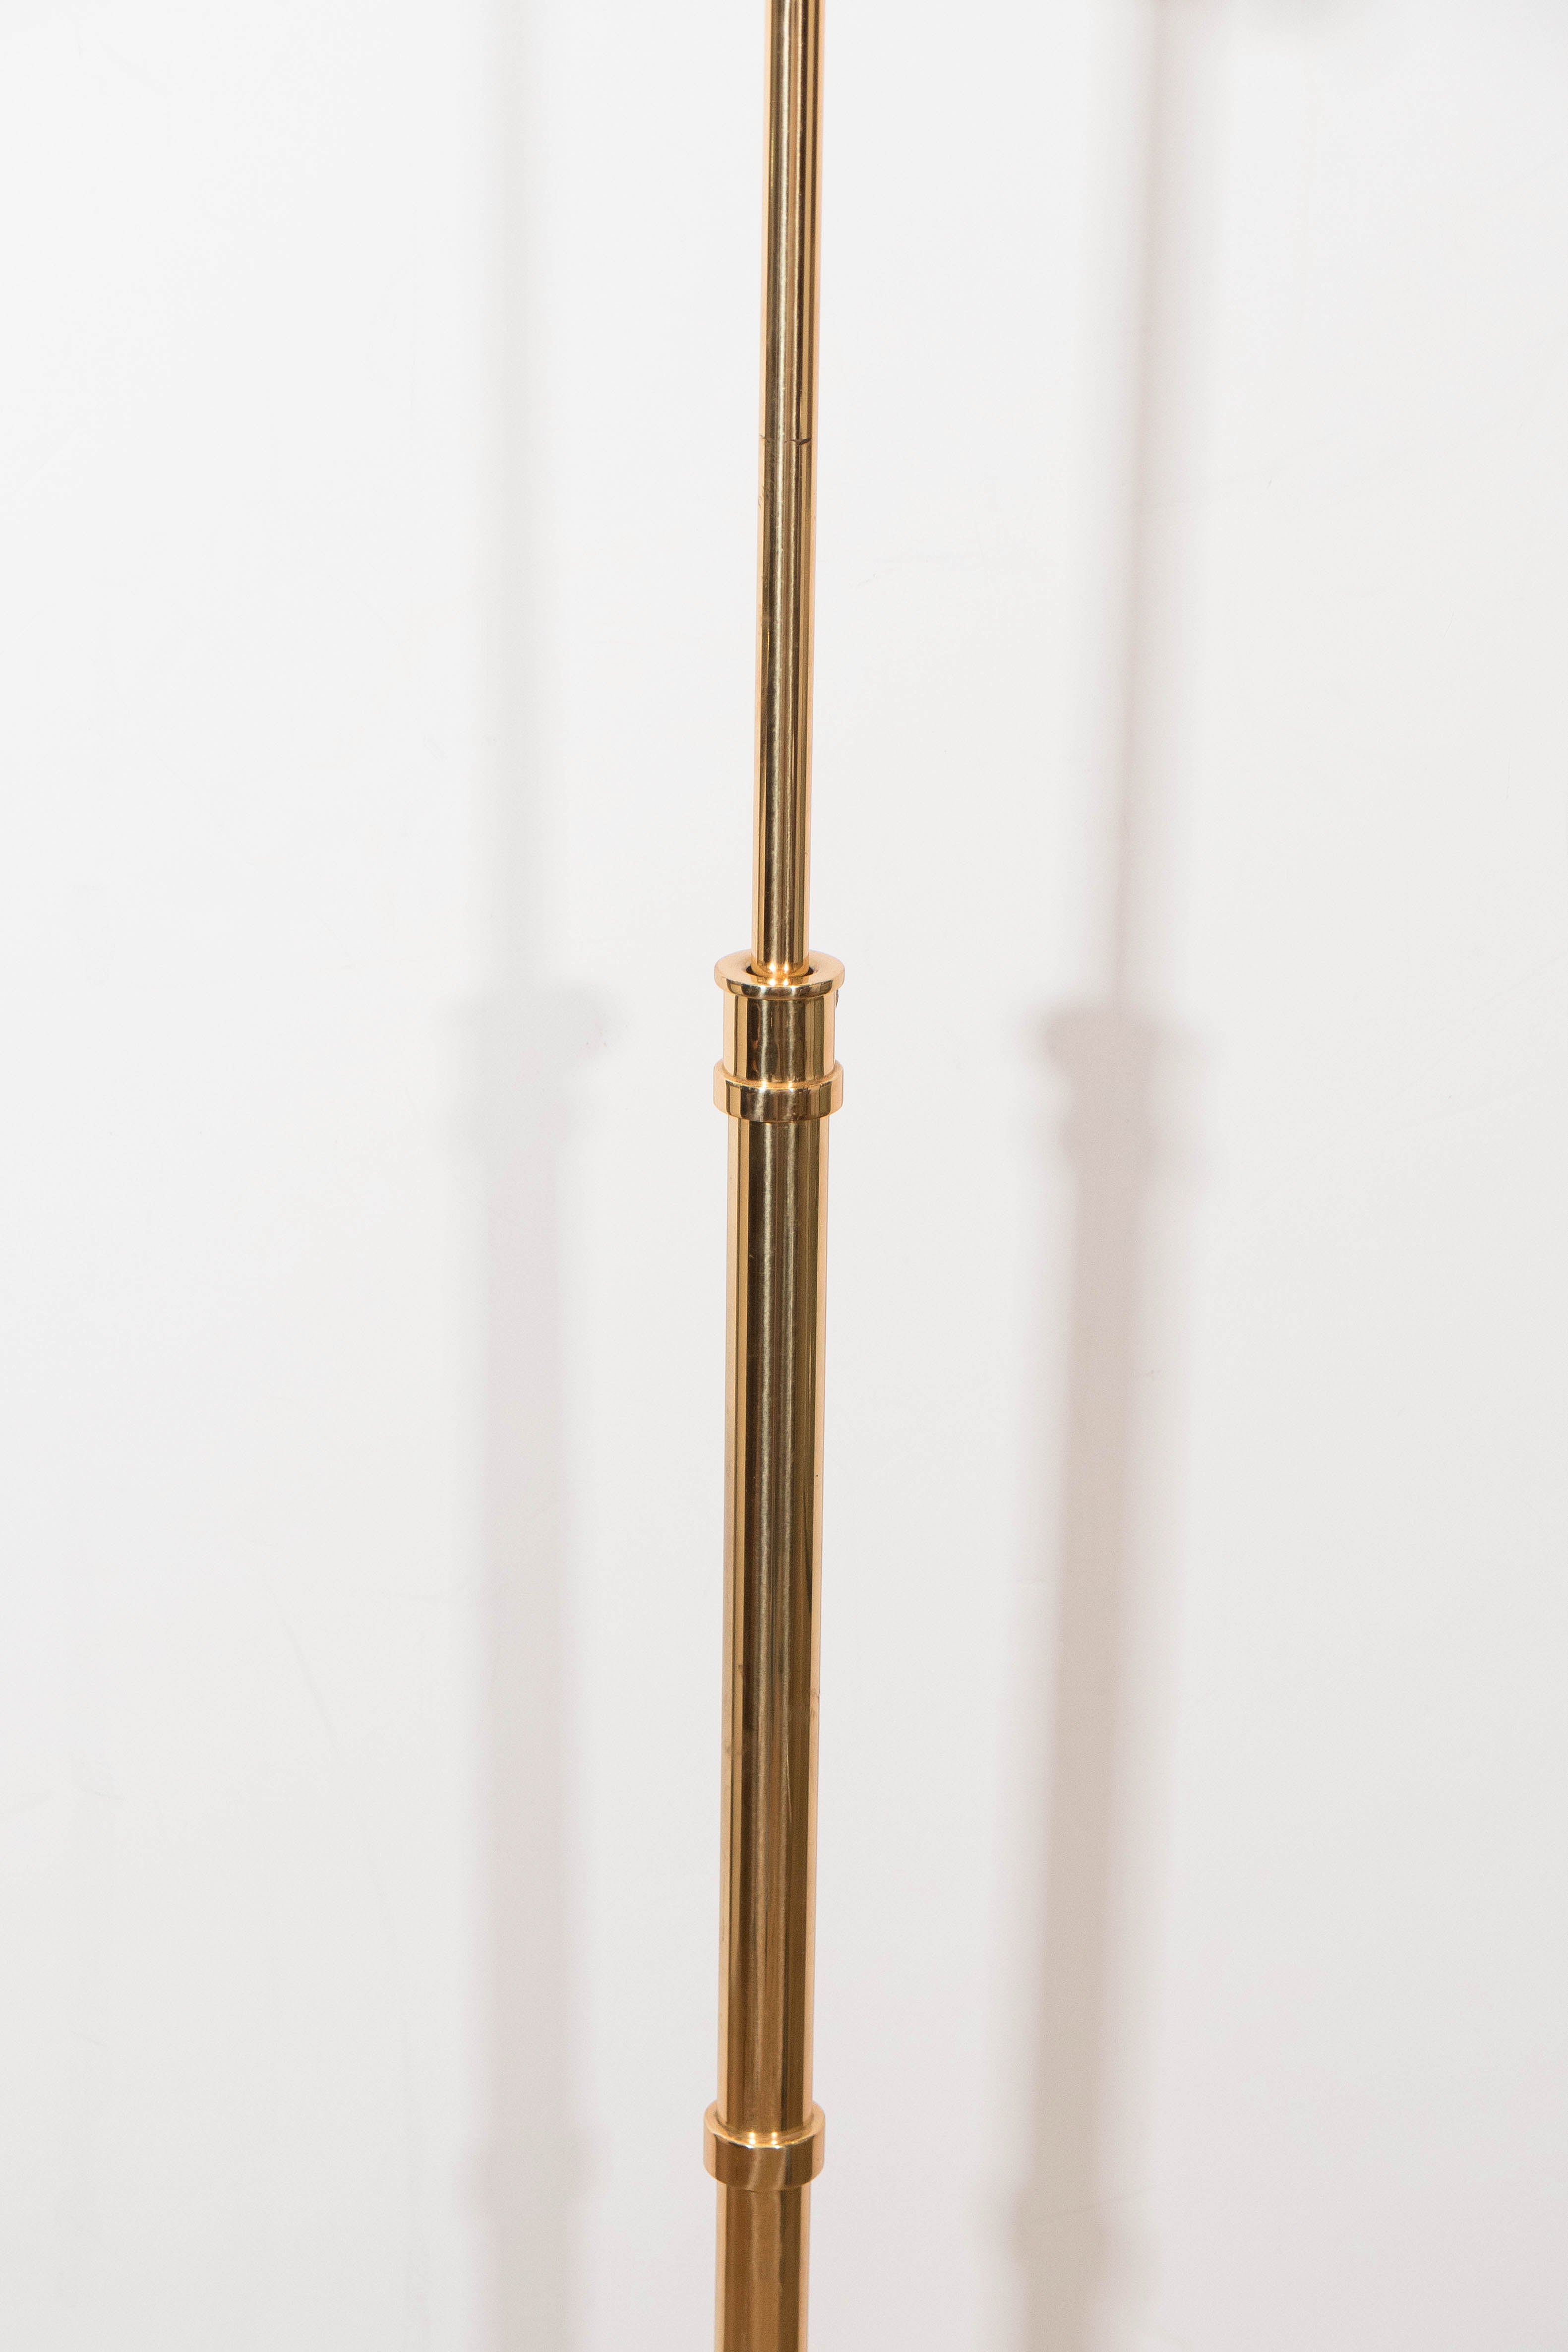 Polished Midcentury Brass Adjustable Floor Lamp with Articulated Arm